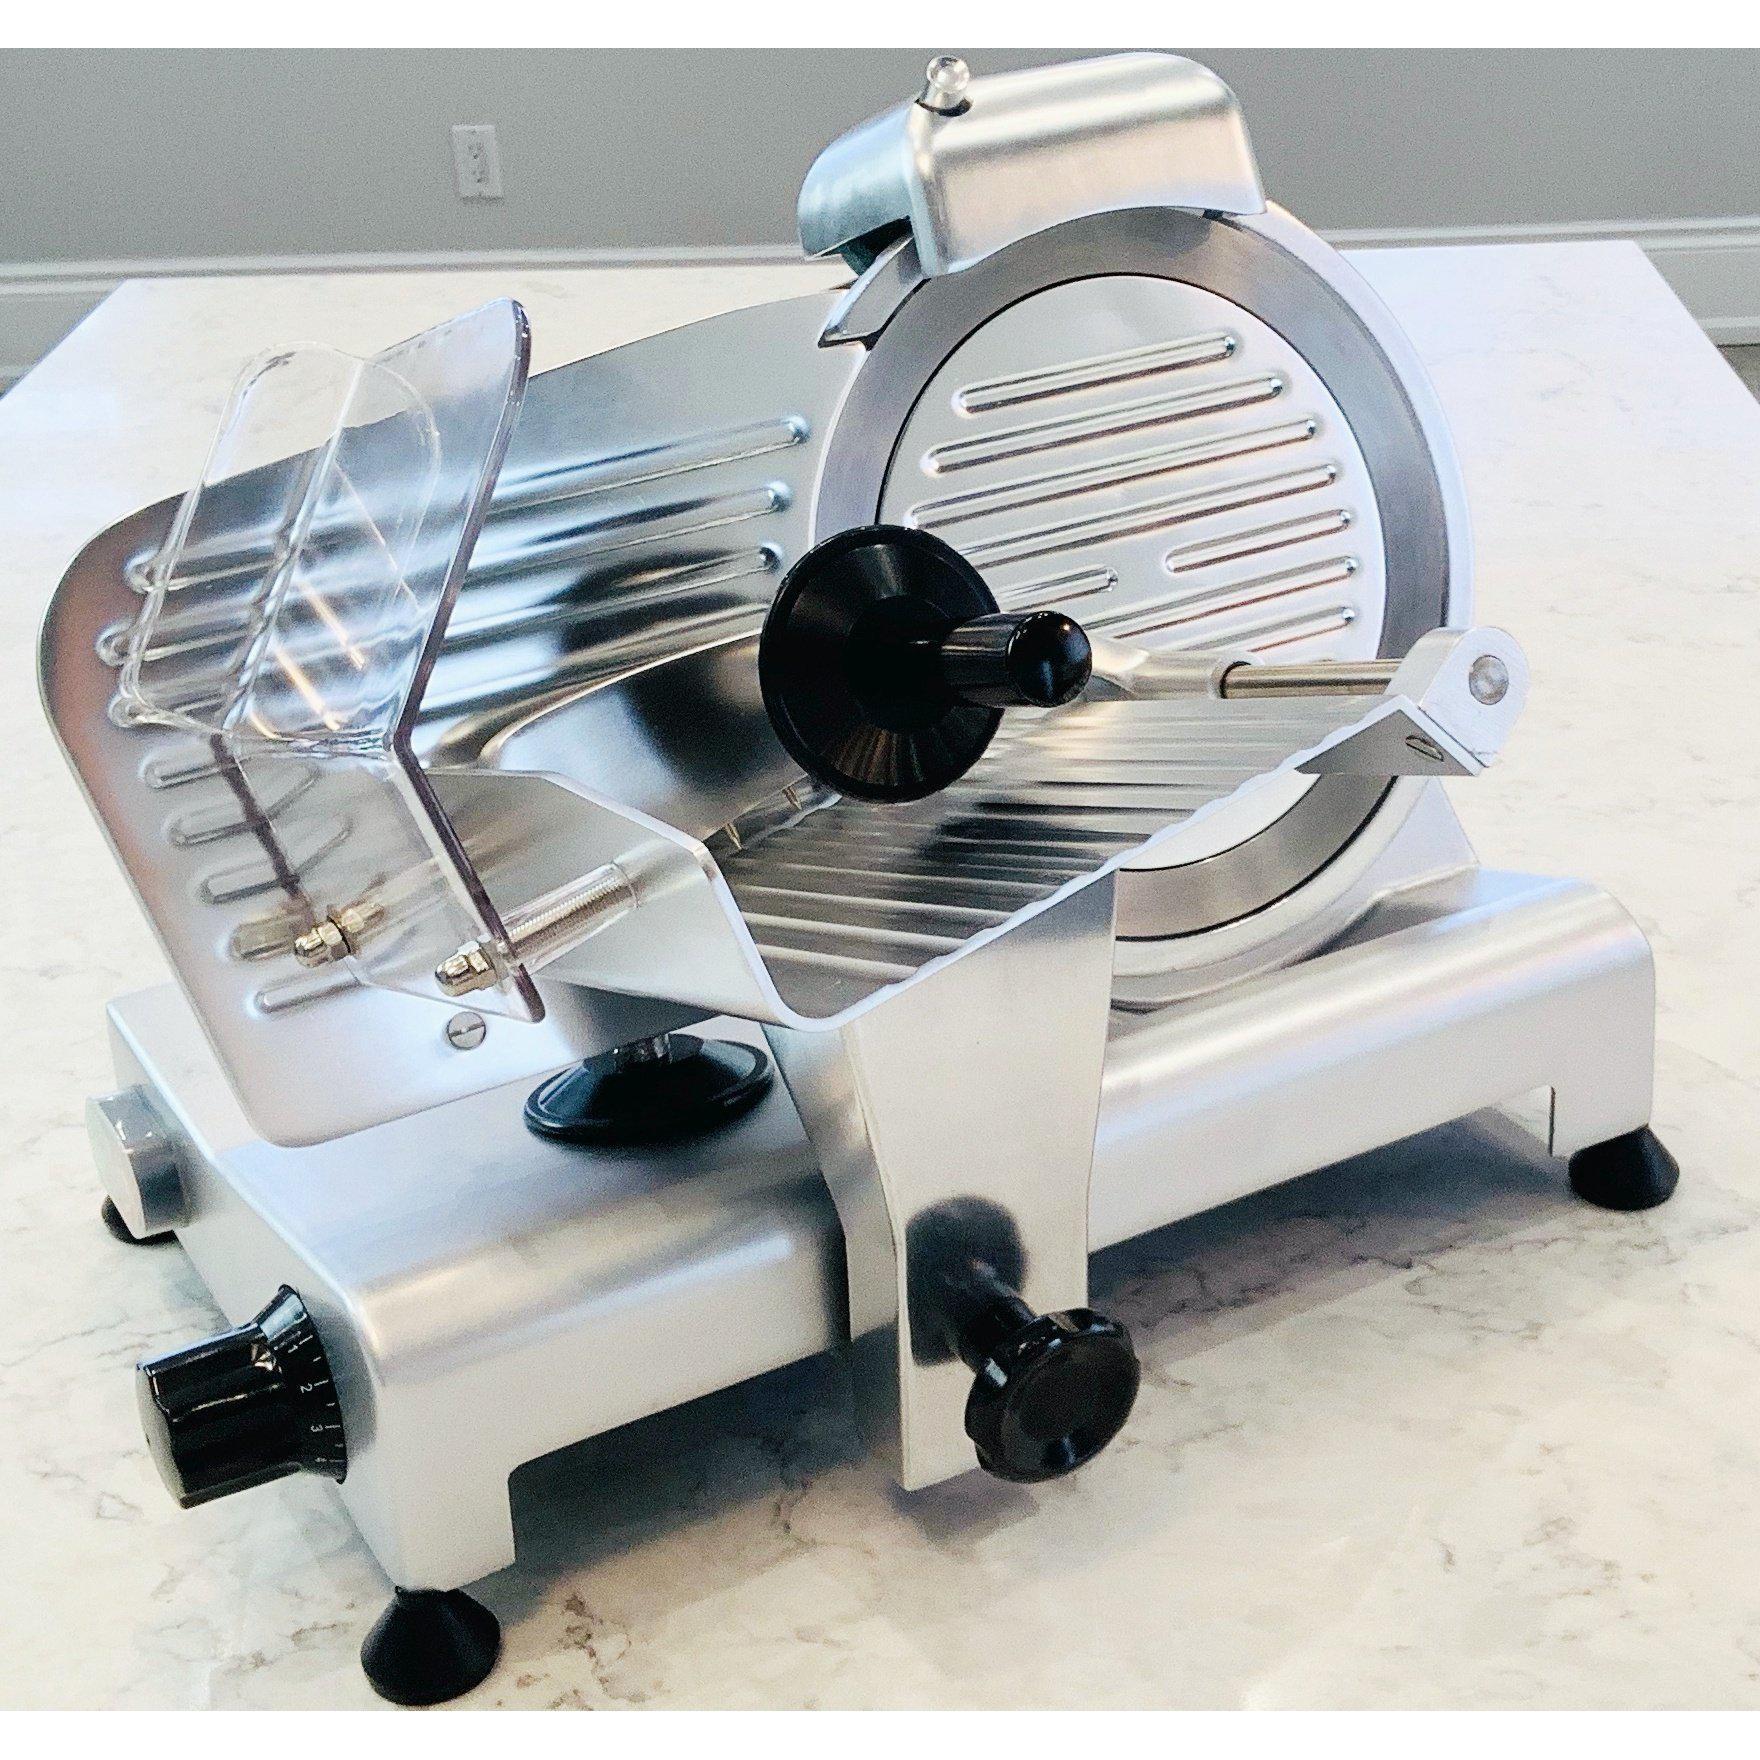 Electric Meat Slicers